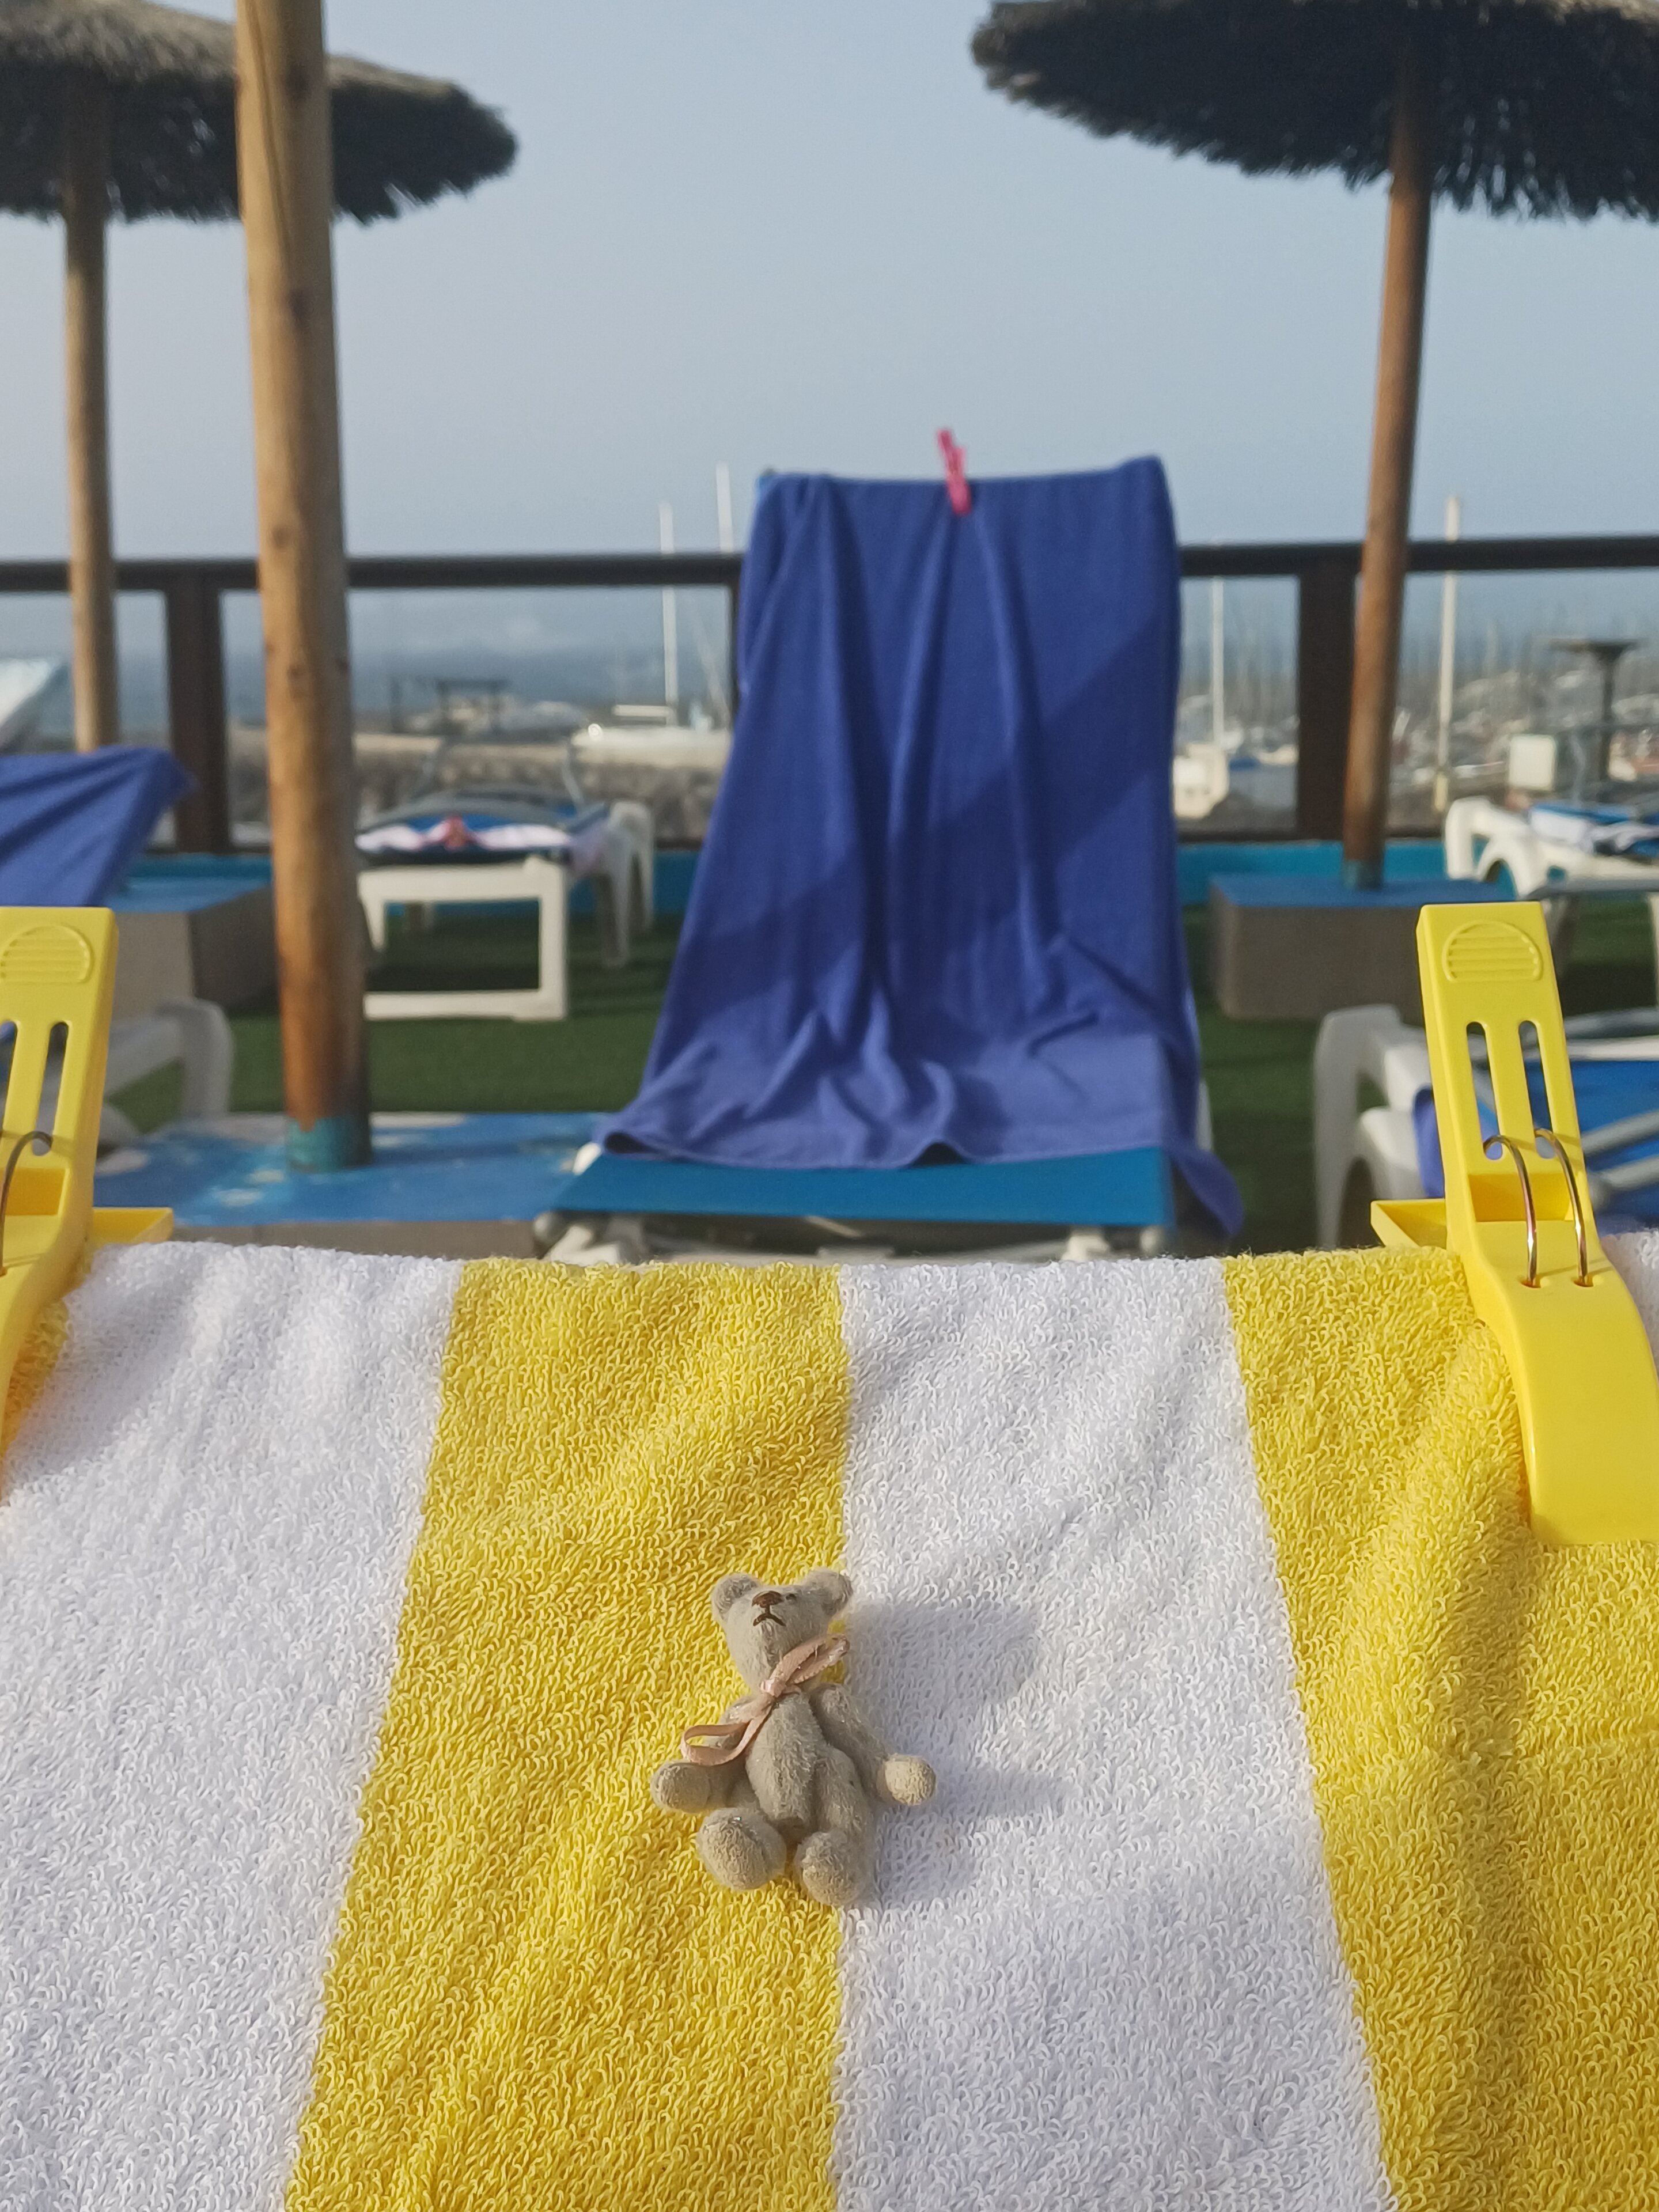 Pistonheads - The image captures a serene beachside setting. There's a lounge chair in the foreground, and a blue towel is spread out on it. A yellow towel is also visible nearby, suggesting a sunbathing or relaxation area. In the background, a swimming pool can be seen, adding to the leisurely atmosphere. Above all this, a light blue sky stretches out, completing the picturesque scene.